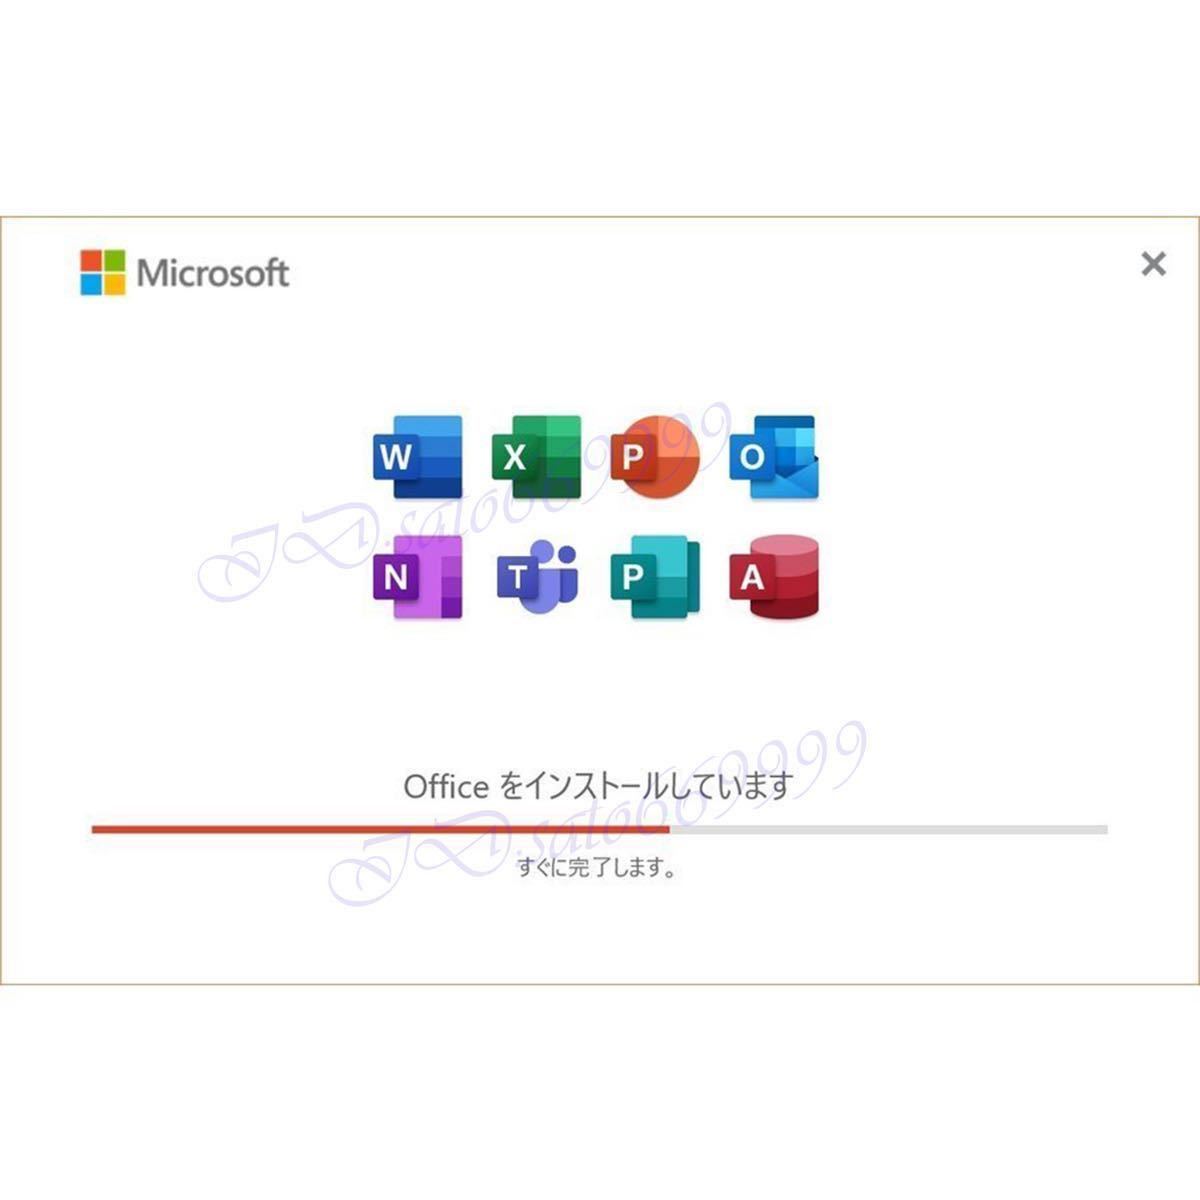 [ limitation sale campaign middle ]Microsoft Office2021 Pro duct key Professional Plus office 2021 regular Pro duct key Word Excel